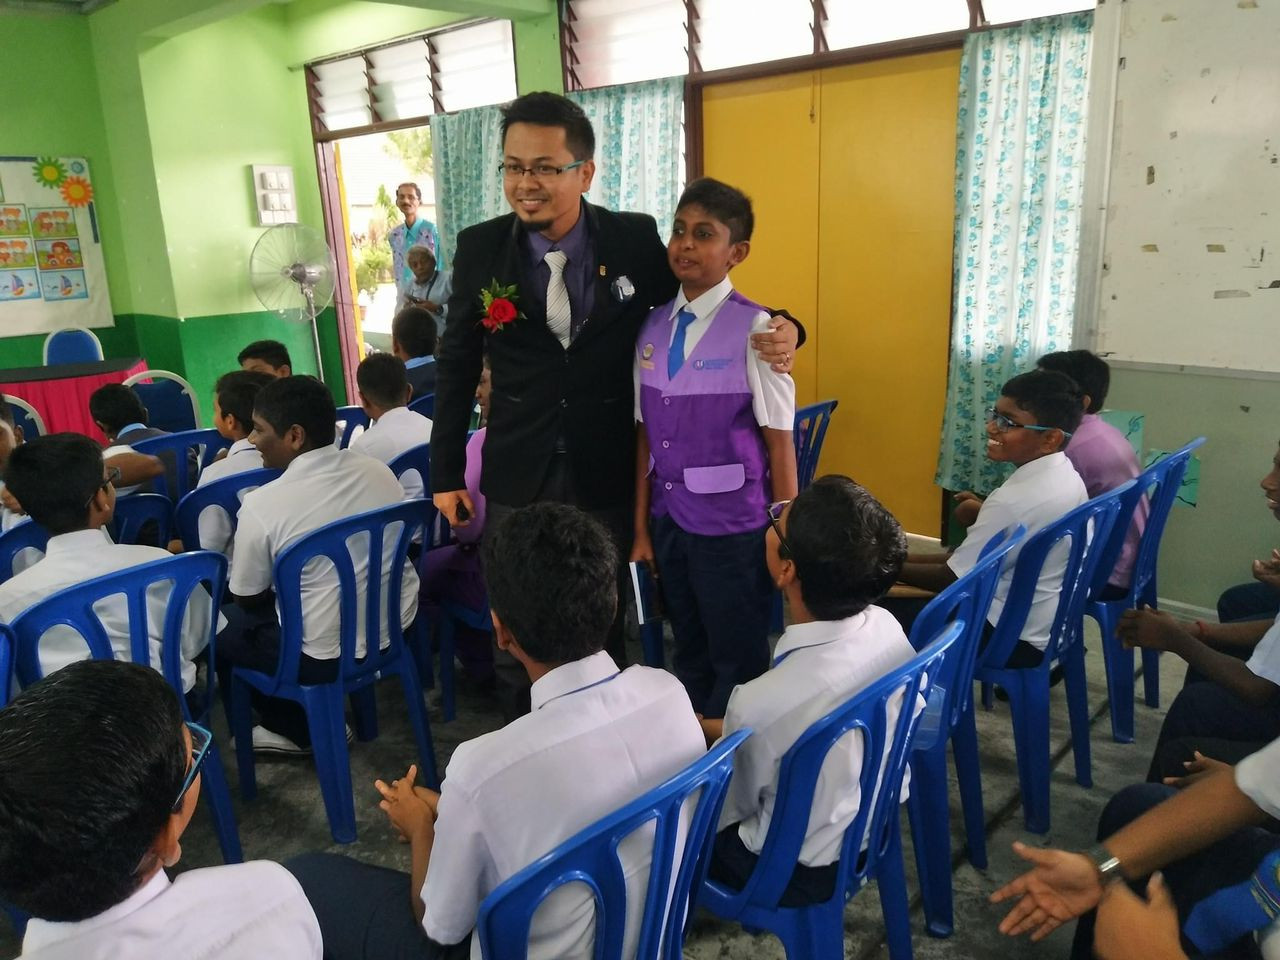 Assoc Prof Mohammad Rahim Kamaluddin who attended a Tamil primary school gives talks to Tamil schoolchildren – at over 200 primary schools so far – motivating and encouraging them to excel in their studies and to succeed at all levels. – Facebook pic, February 6, 2022